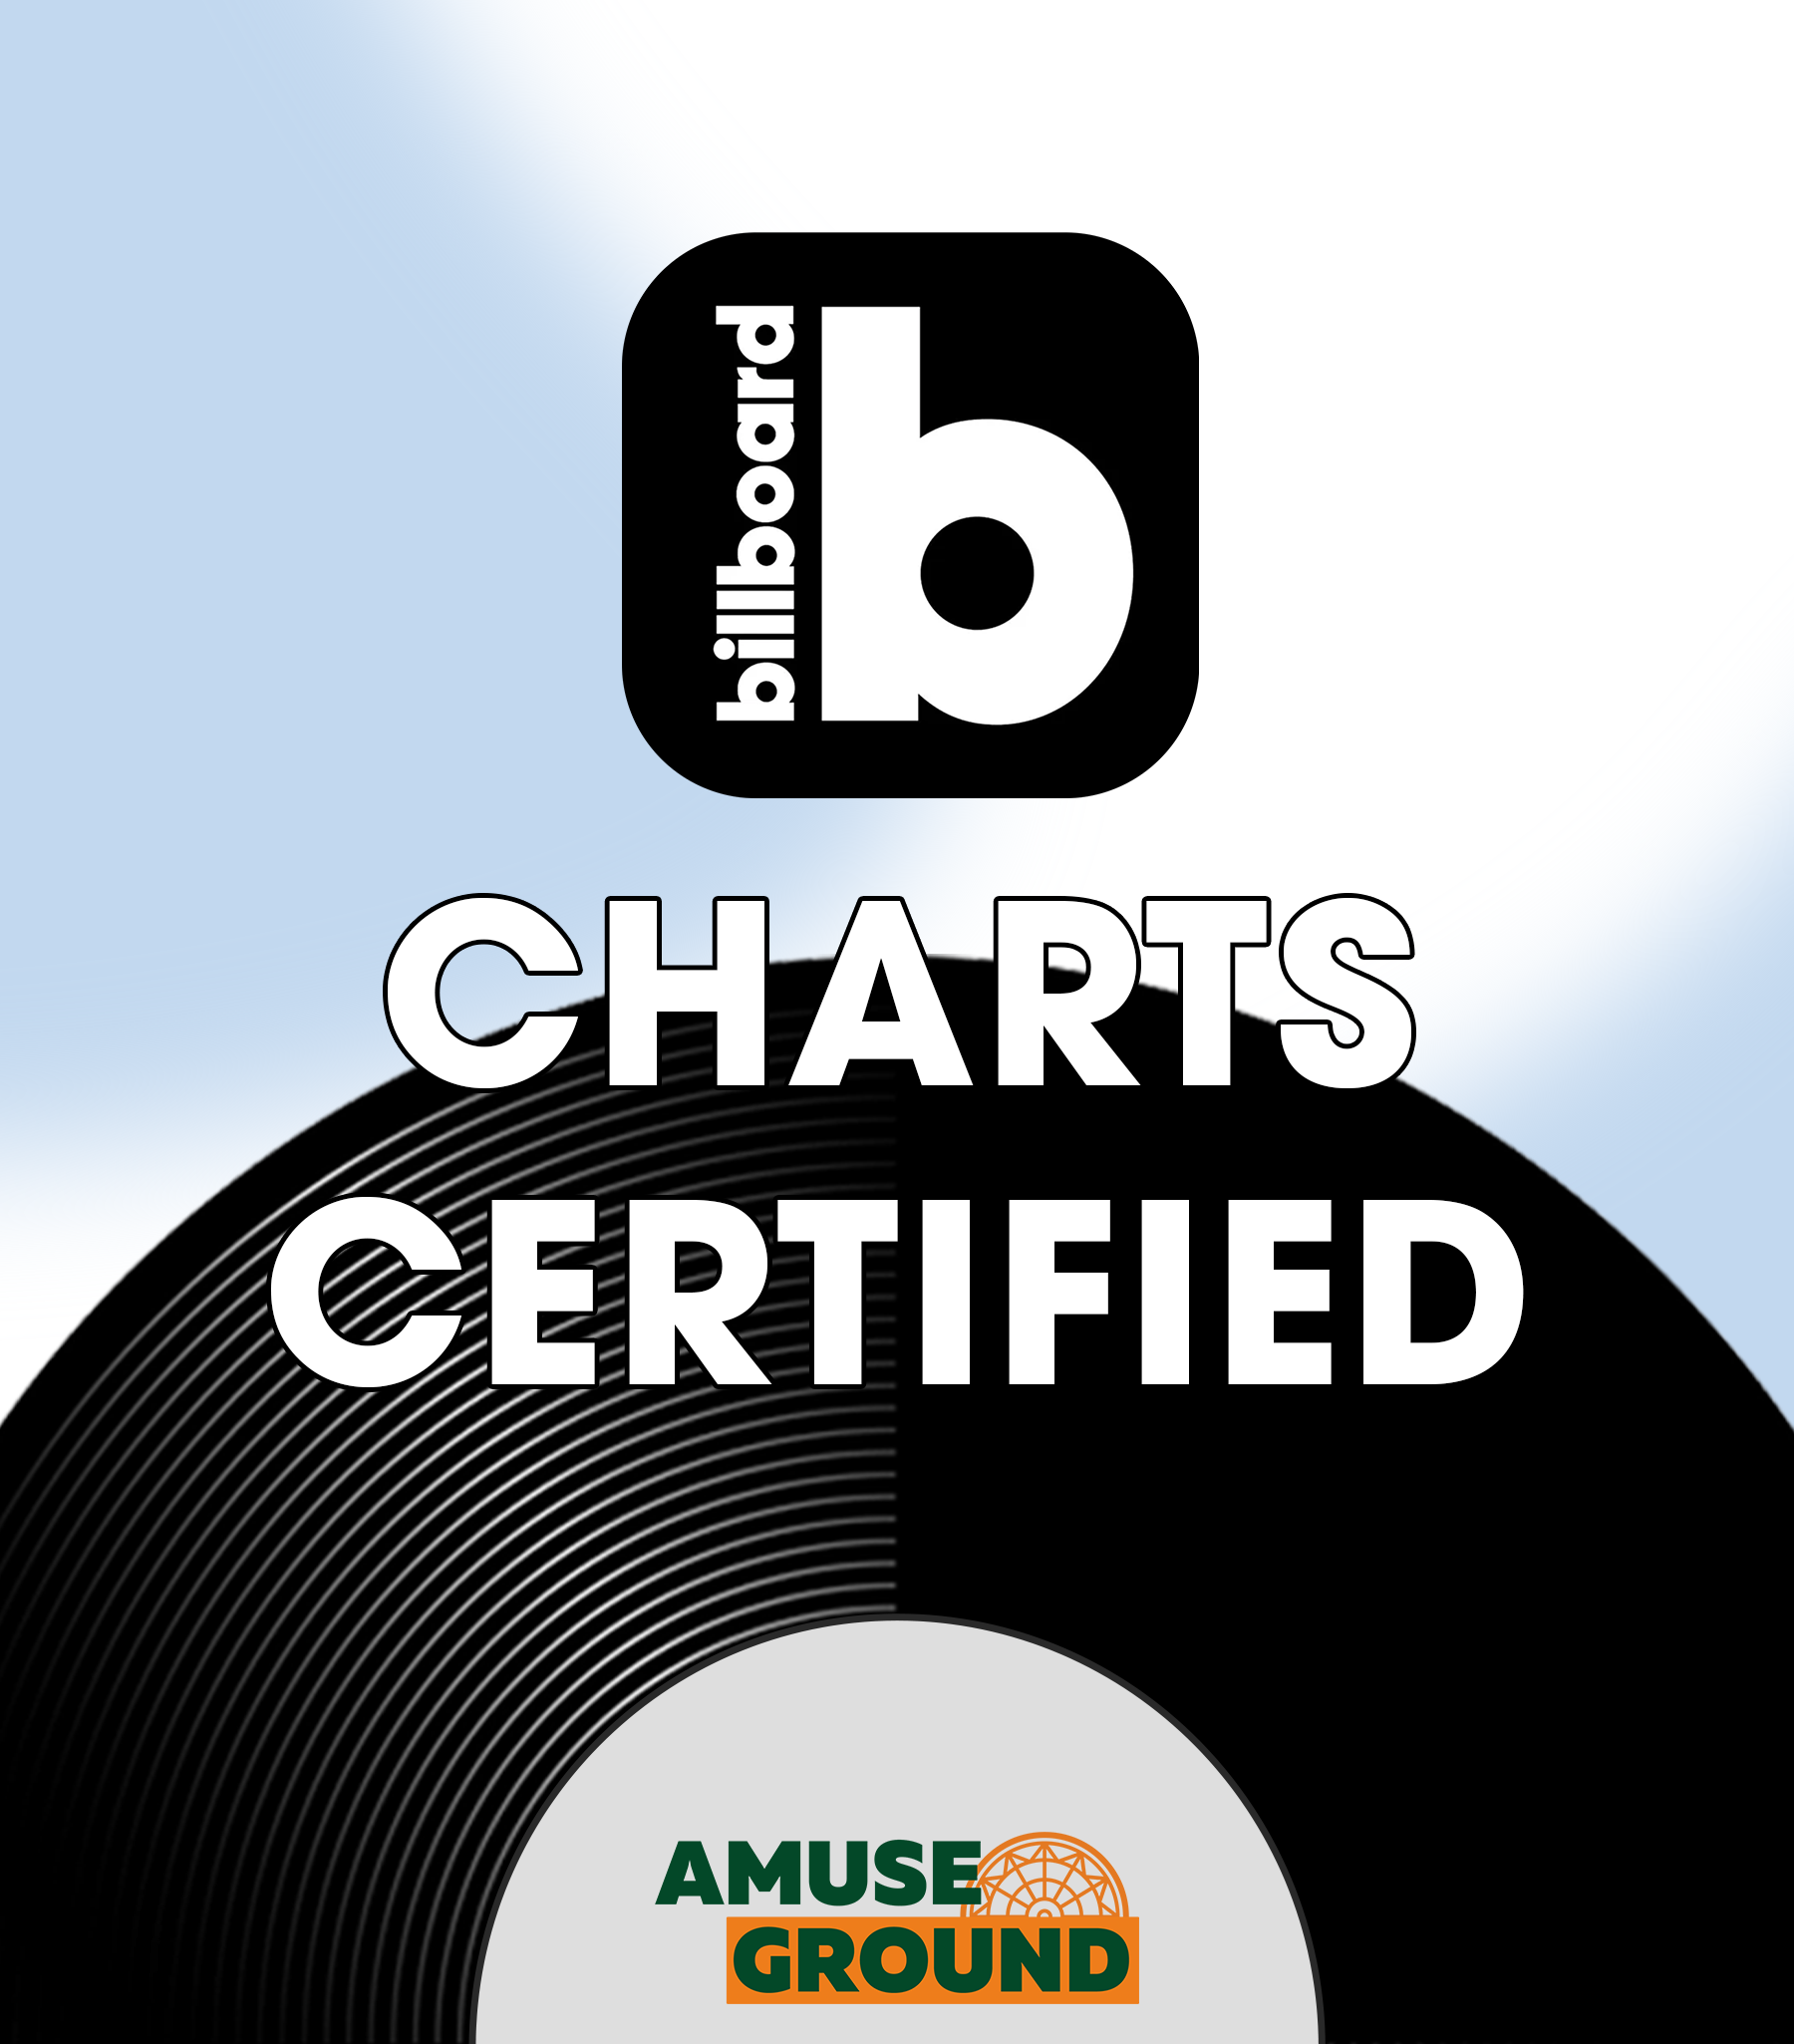 billboard_charts_certified_carousel_mobile.png